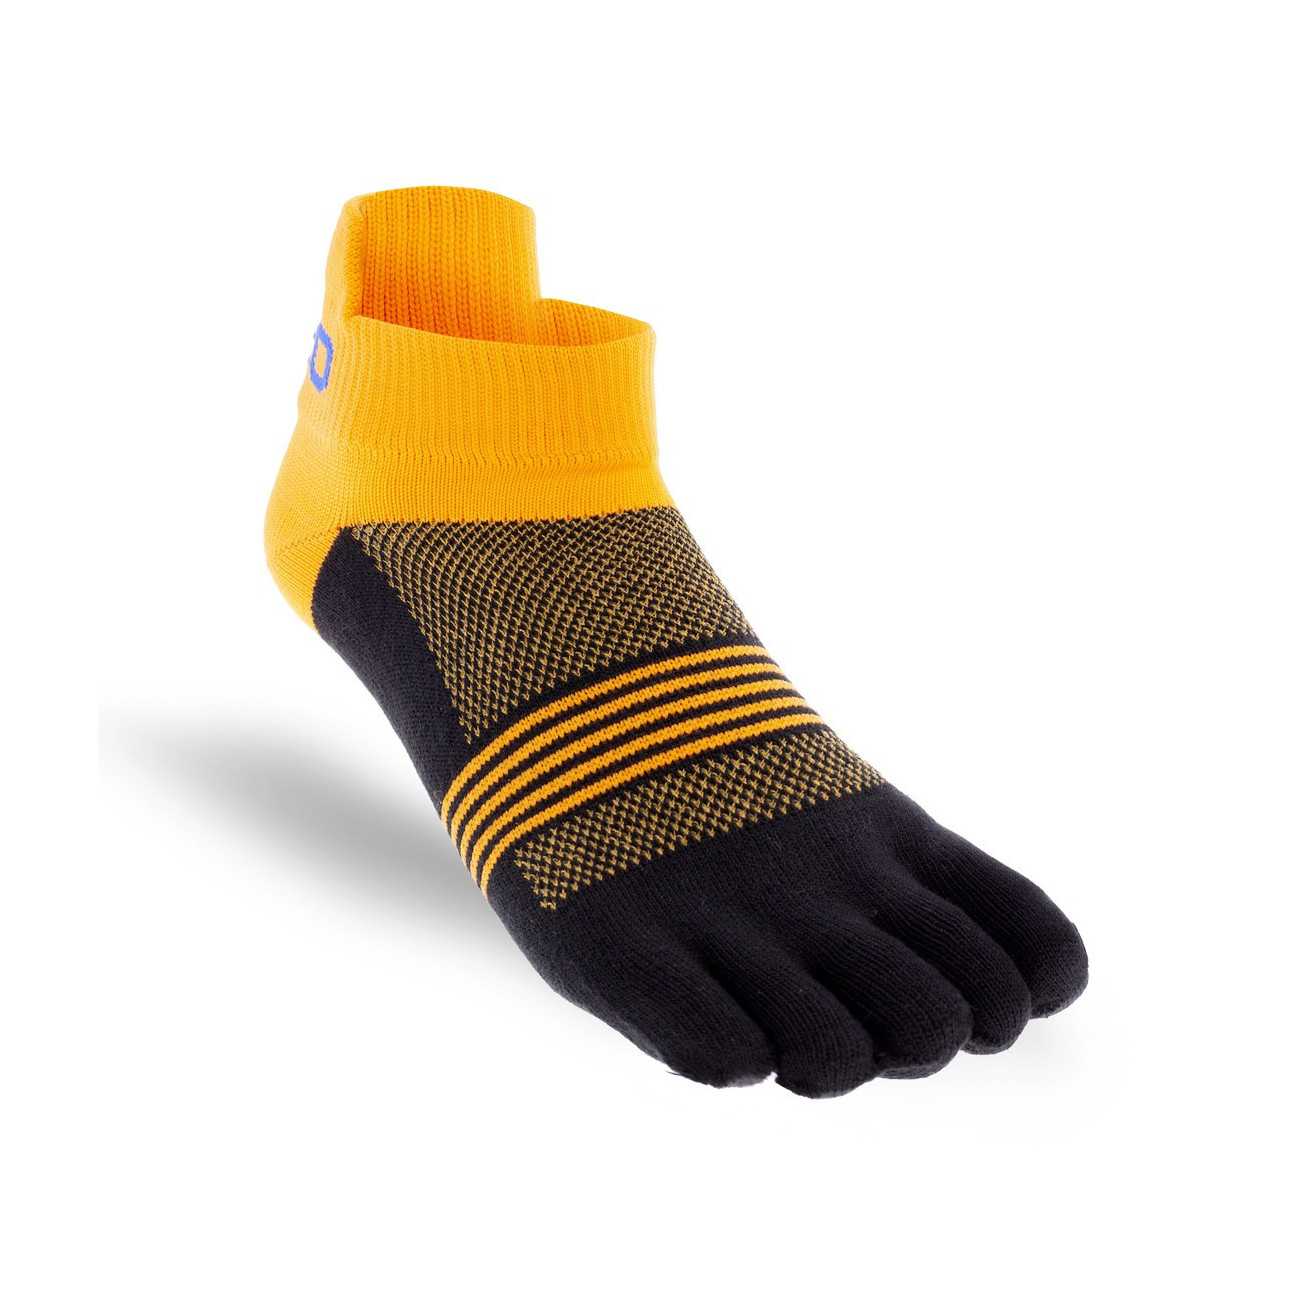 Comprar CALCETINES OS2O ULTRA TOESOCKS Online